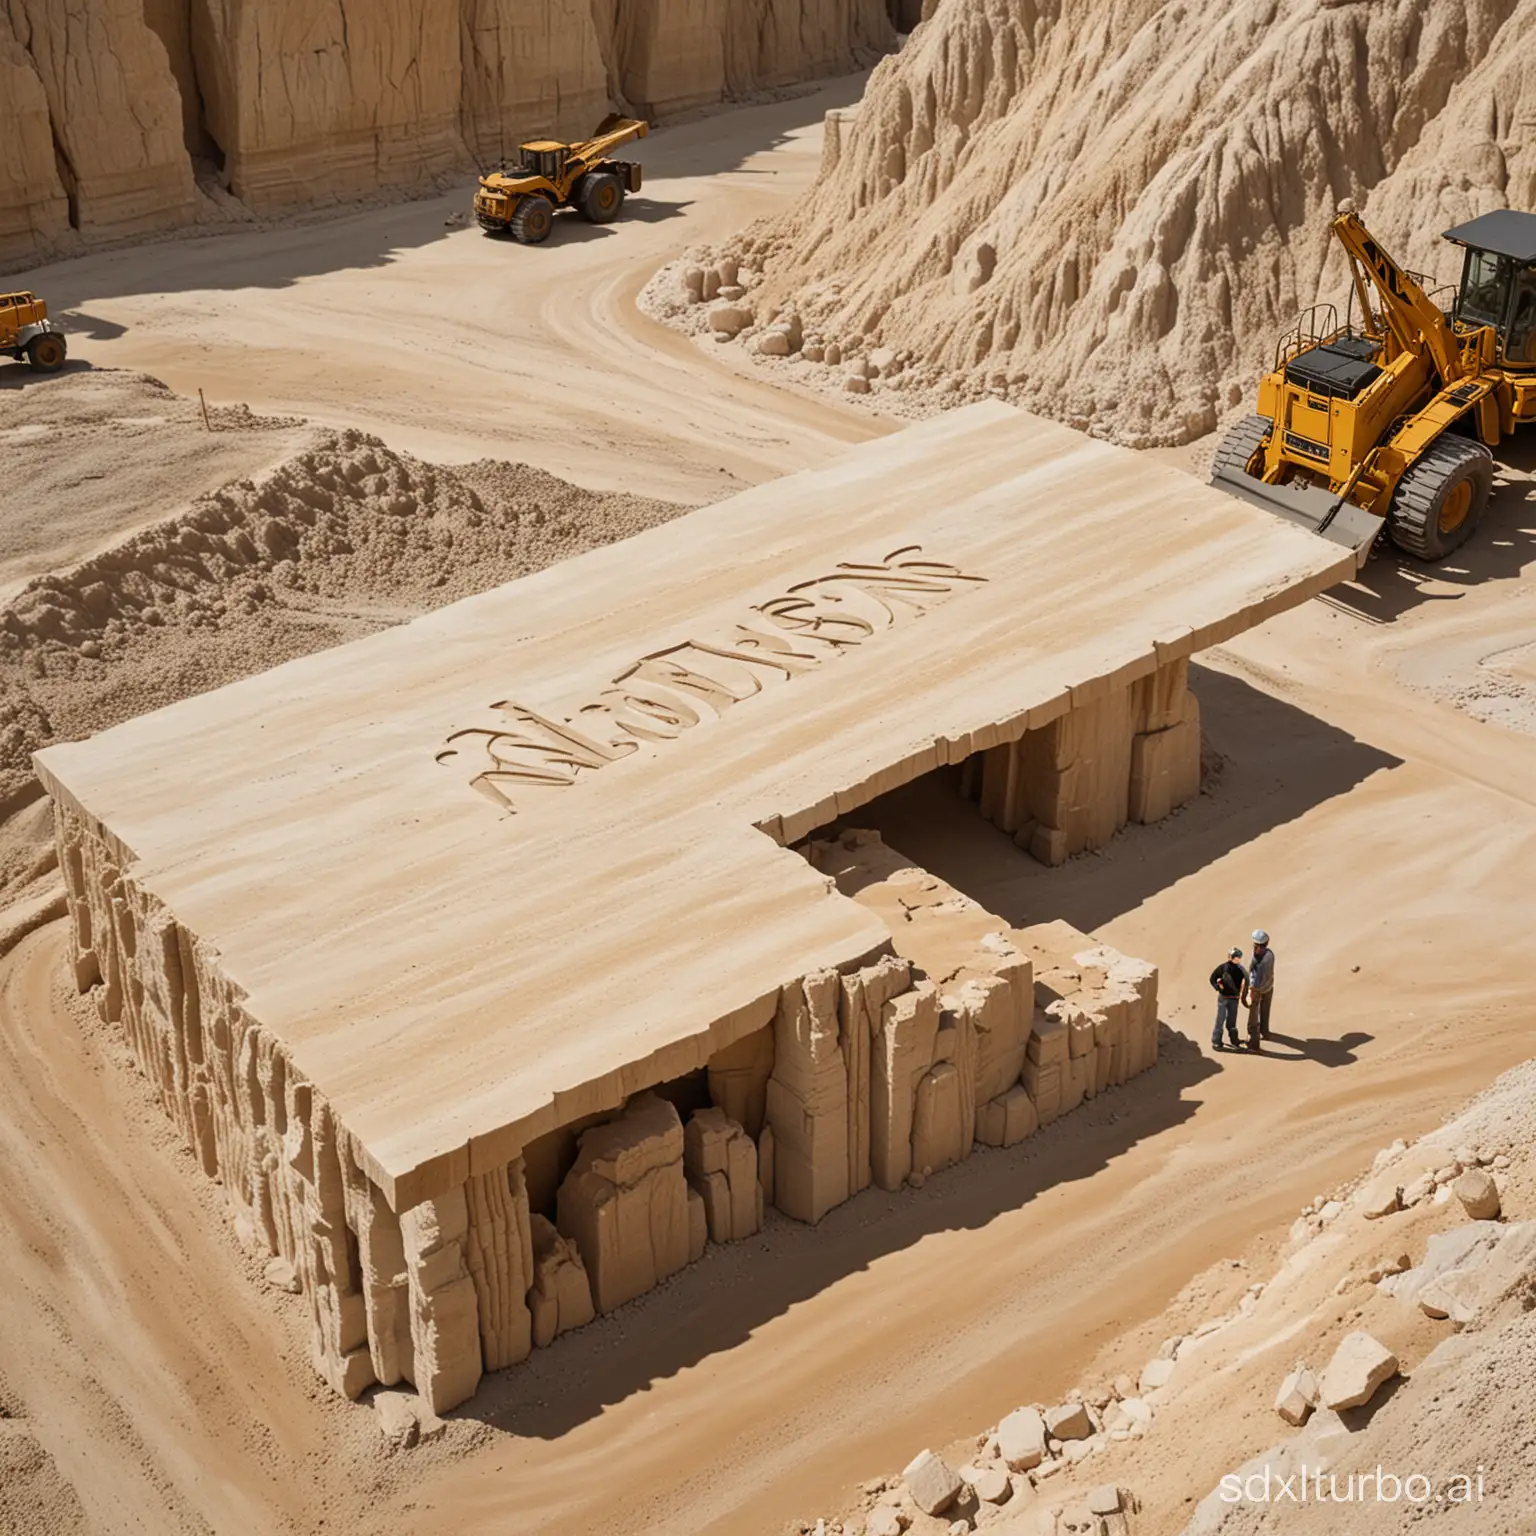 A highly realistic depiction of a travertine stone quarry, resembling an actual mining site. The scene captures the rugged, industrial environment of the quarry with heavy machinery actively operating and large blocks of travertine stone prominently displaying their unique beige textures. In the foreground, a craftsman, assisted by a woman who admires his work, meticulously hand-carves a piece of travertine into a sophisticated table with the letter 'N' engraved on it. This image emphasizes the authentic look and feel of a working stone quarry.